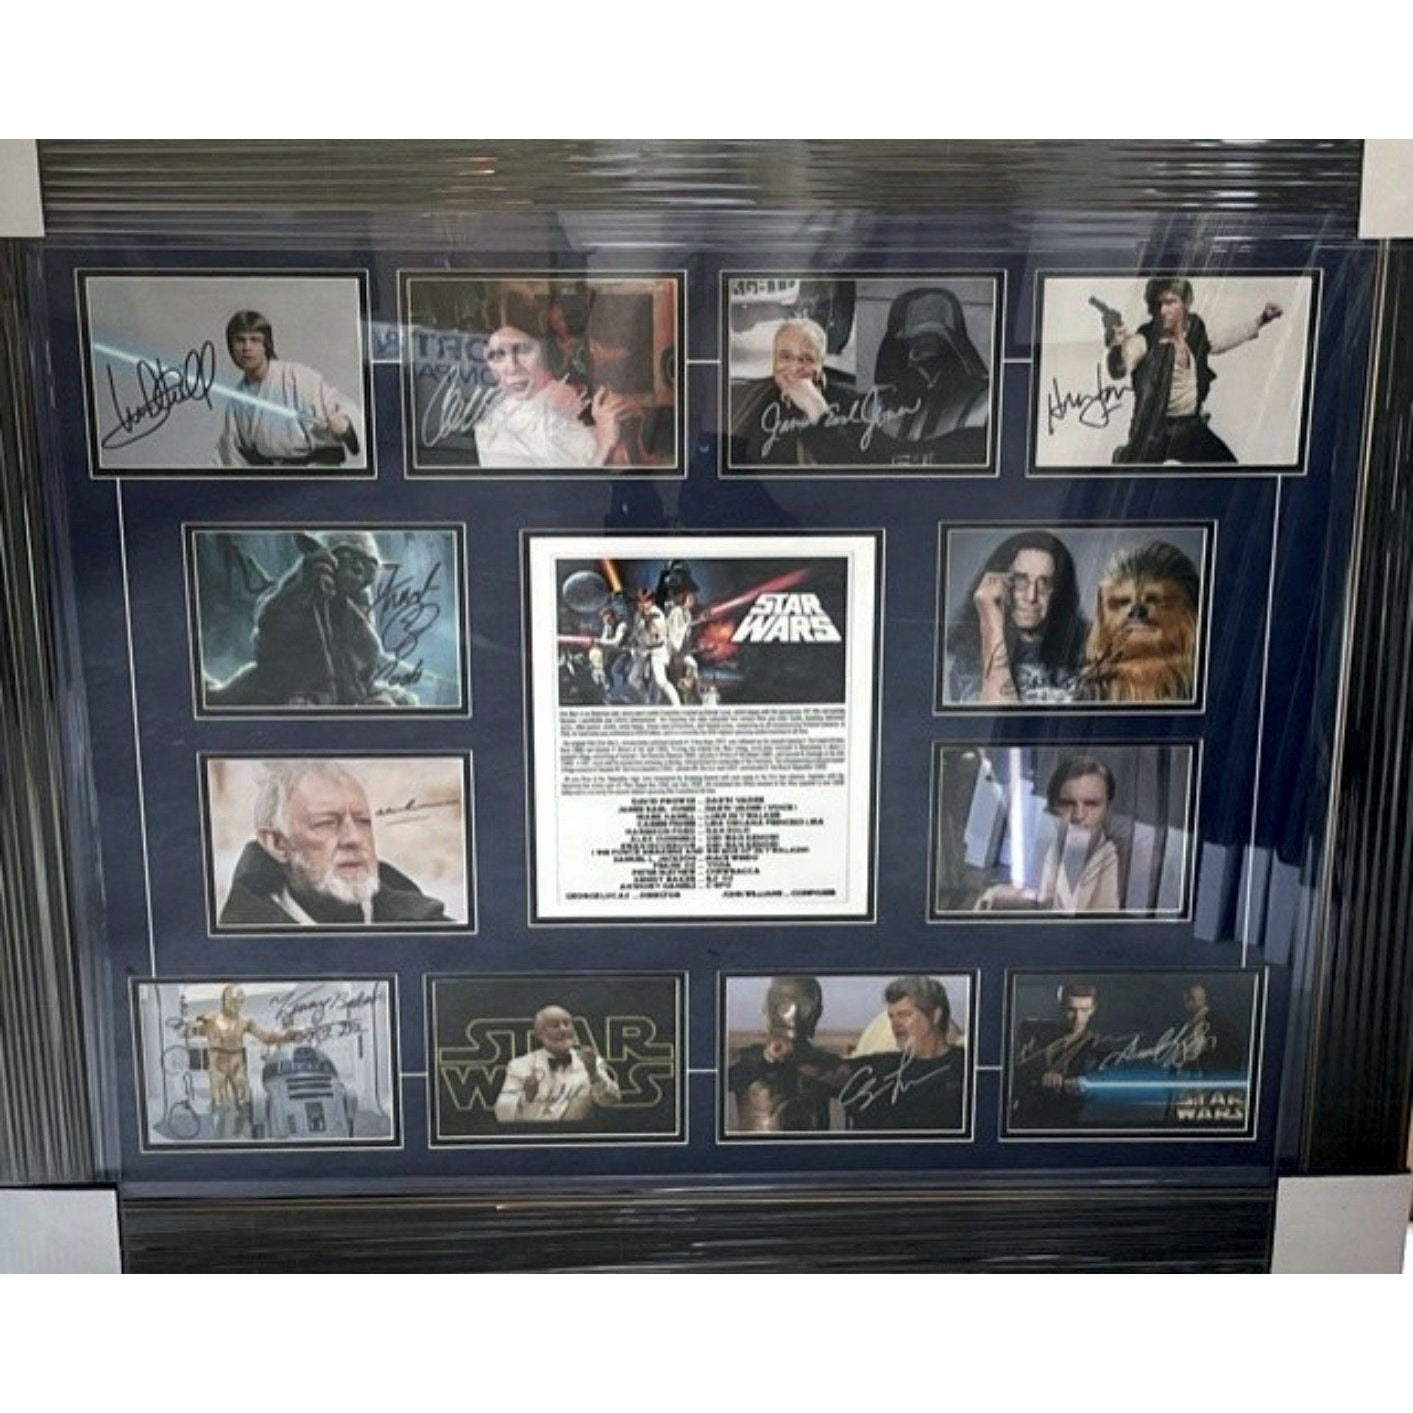 George Lucas Star Wars 5 x 7 photo signed with proof